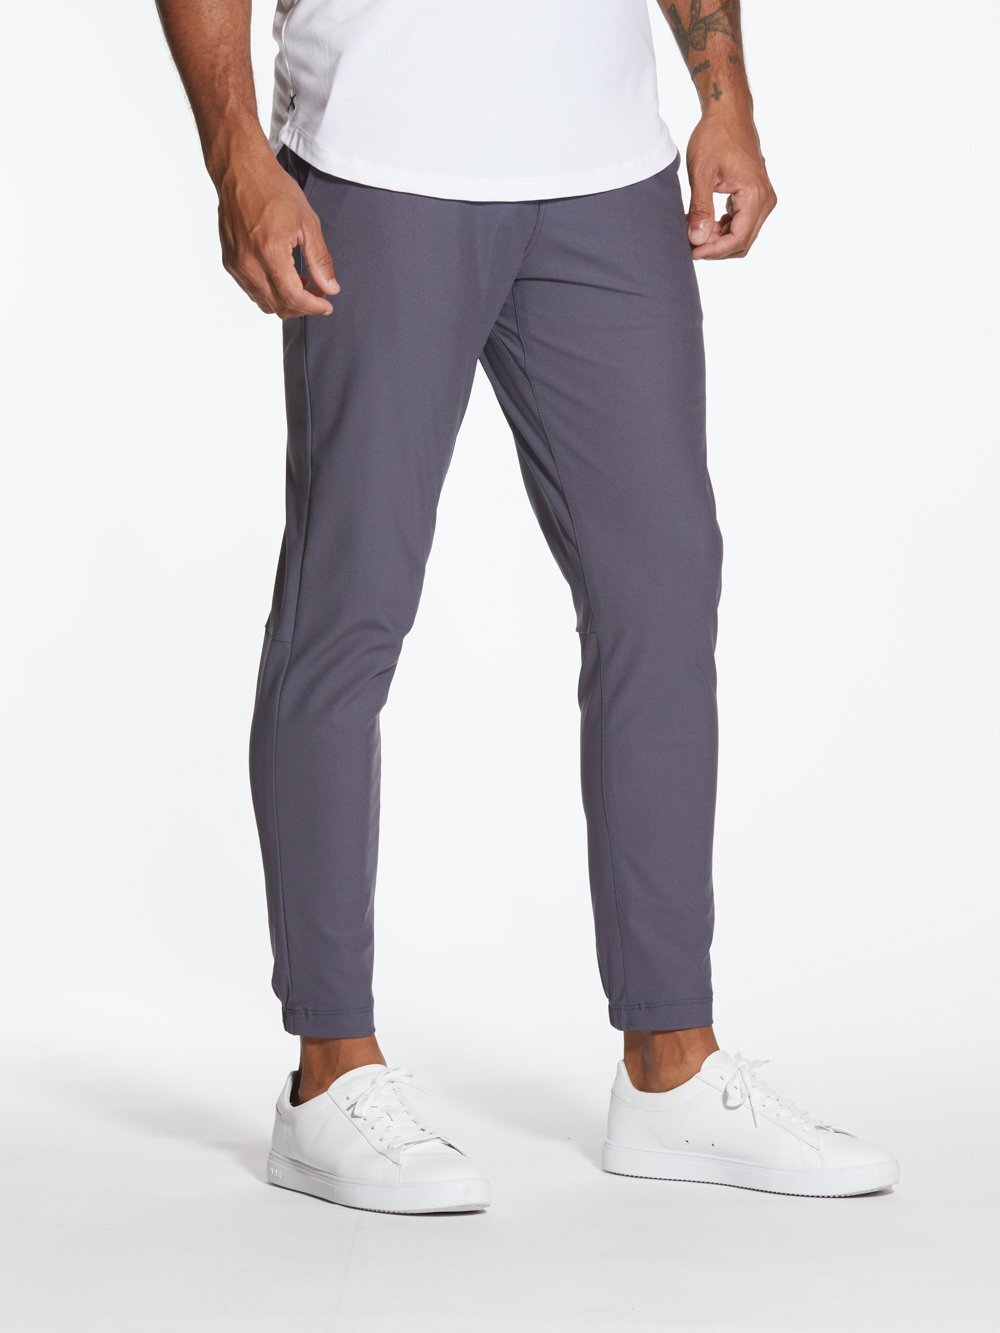 CUTS AO Joggers Review- Cuts Joggers for Any Occasion — duuude | Only ...